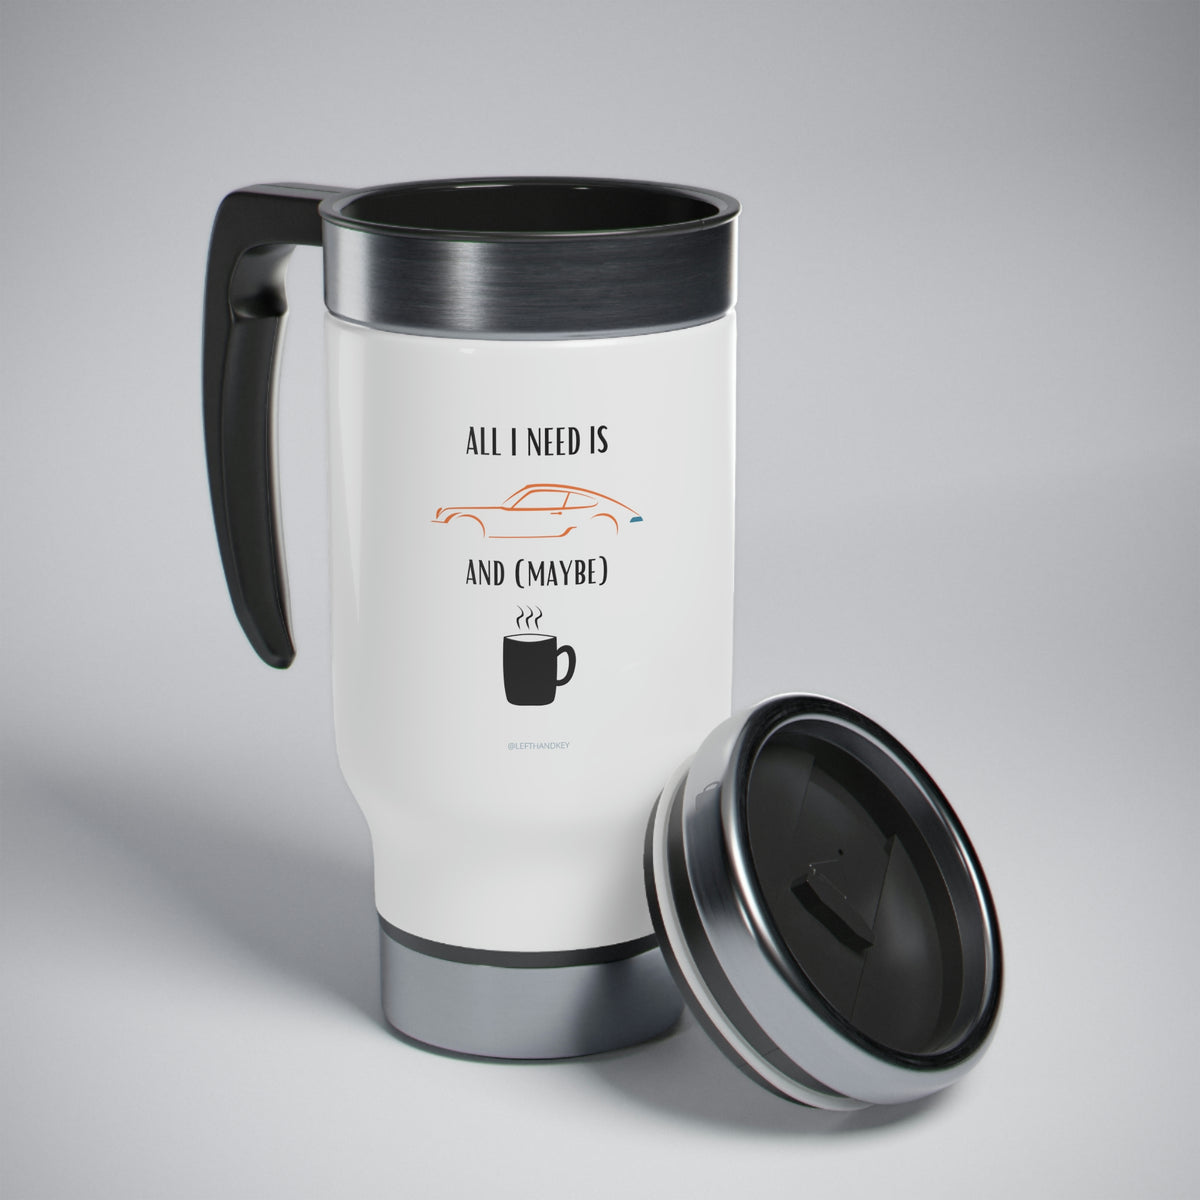 All I Need is Porsche Stainless Travel Mug 14oz